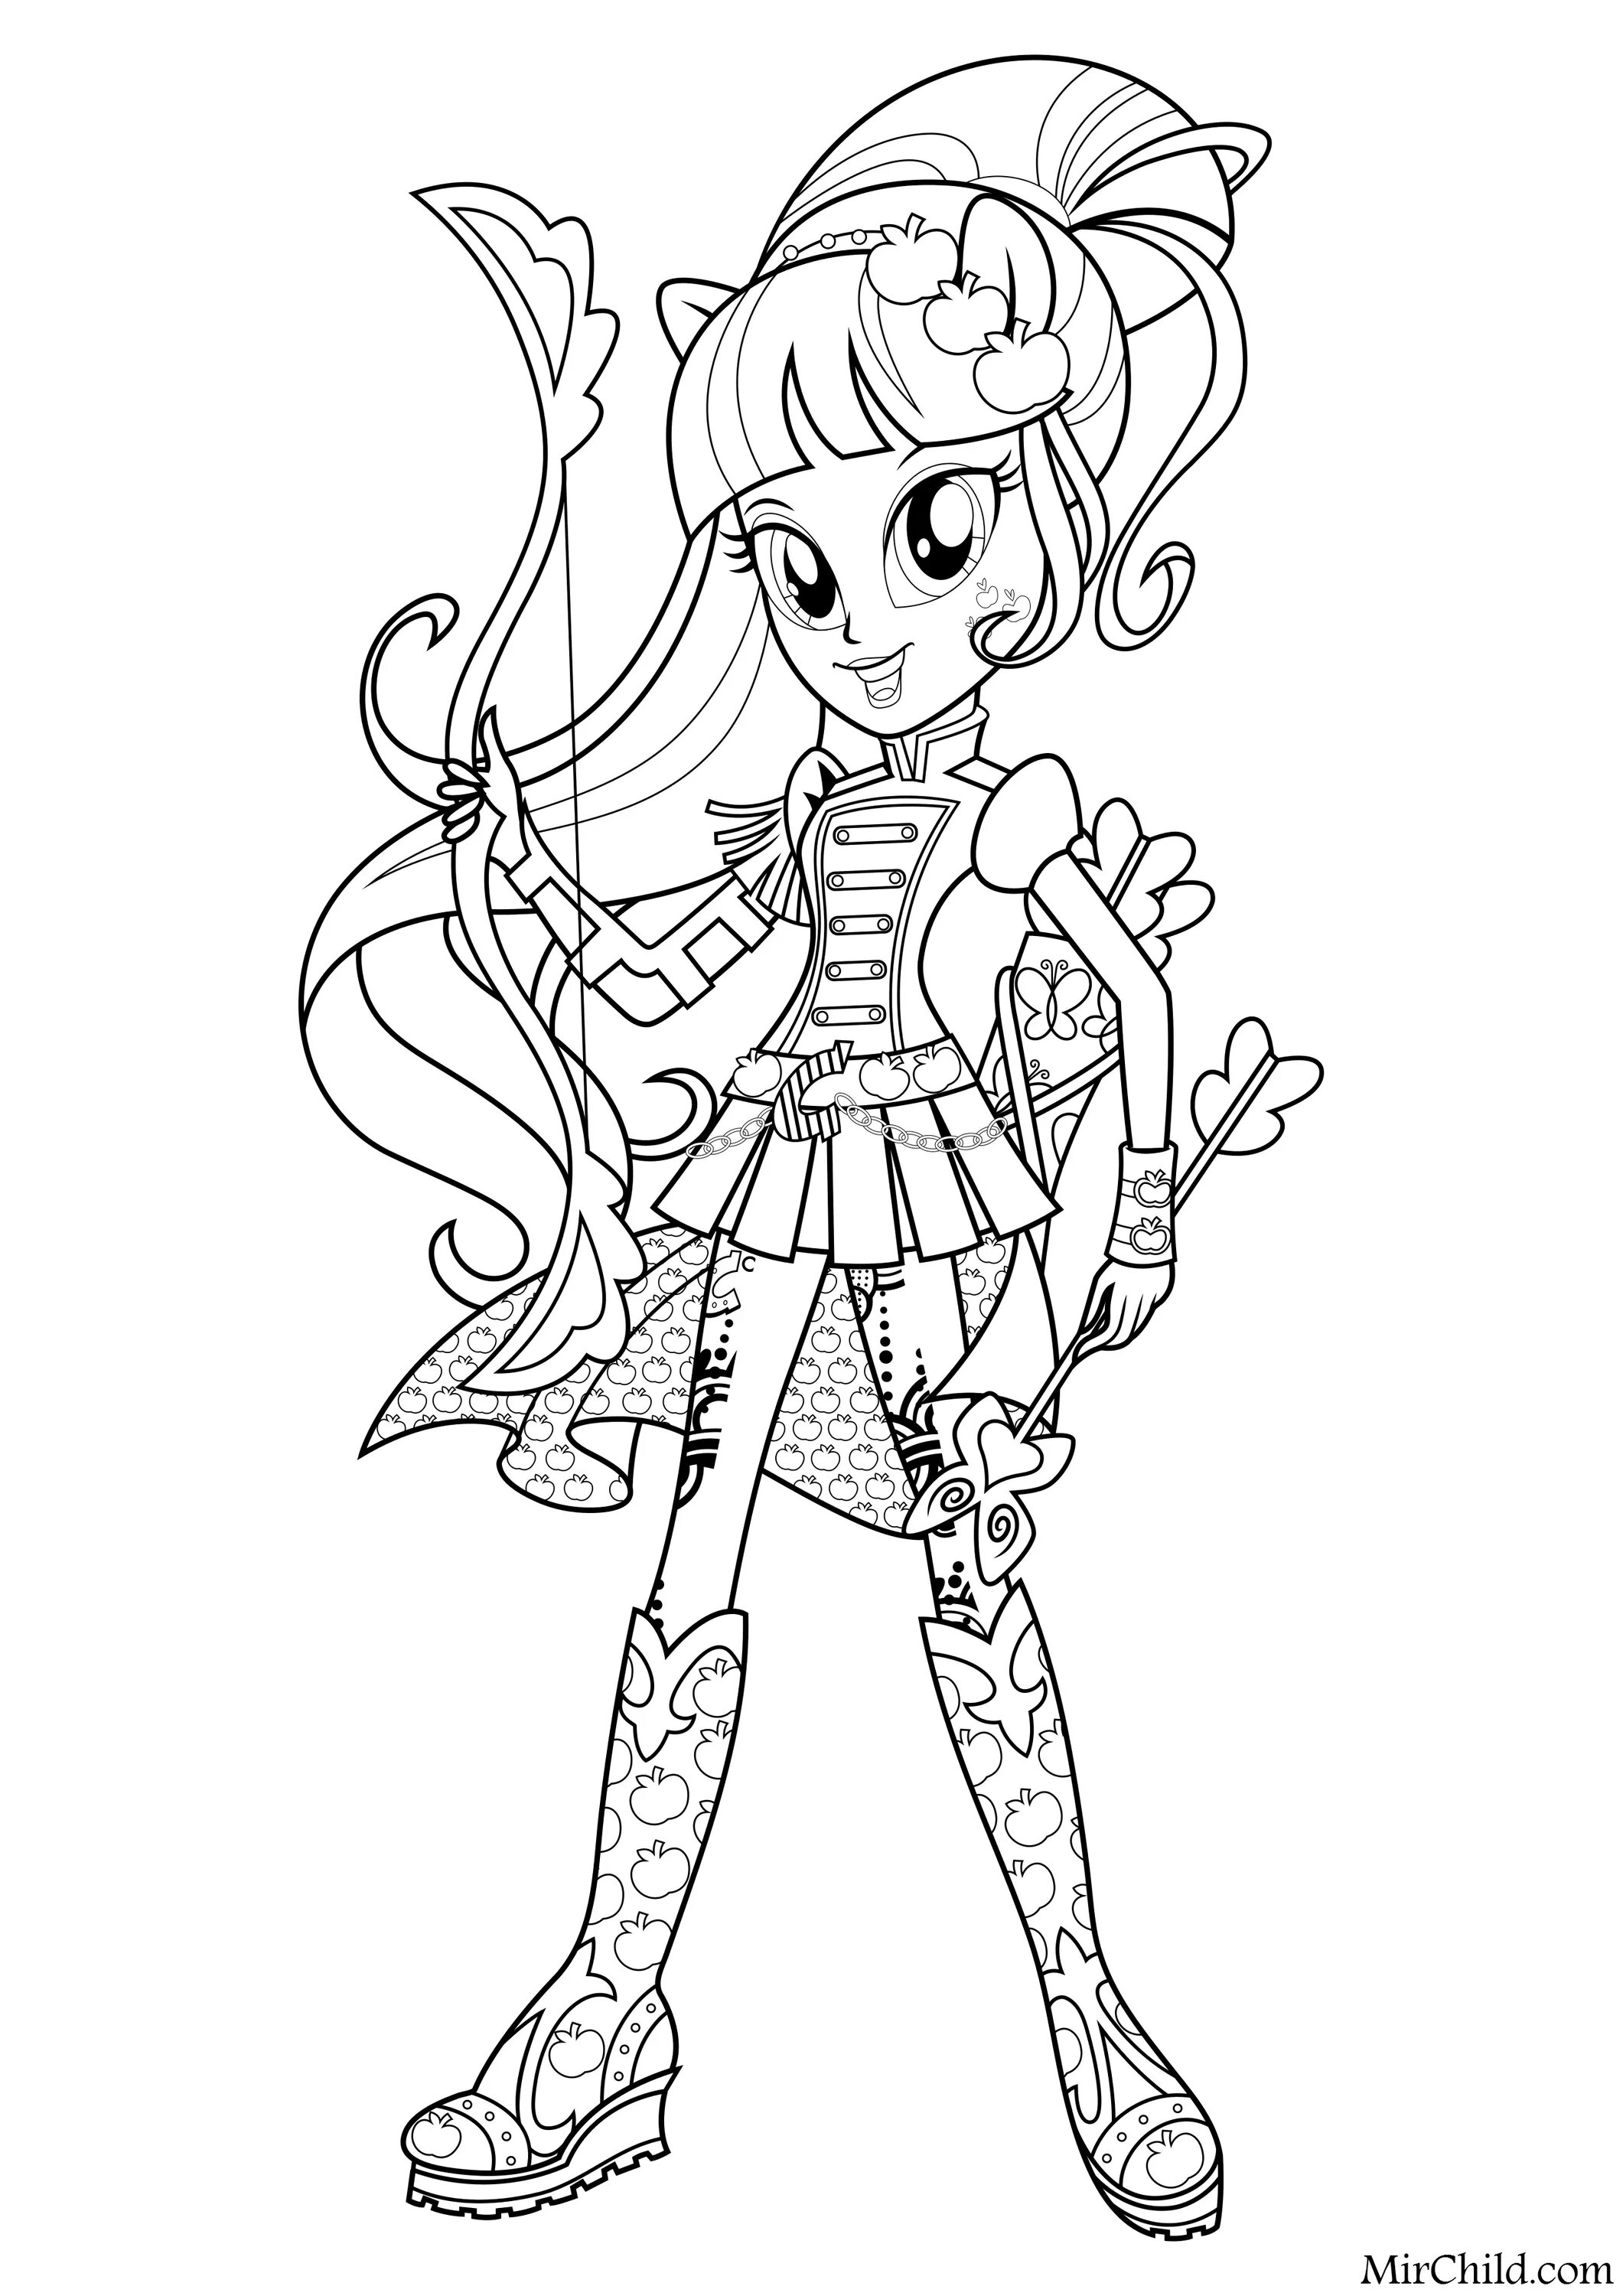 Fun little pony girls coloring pages